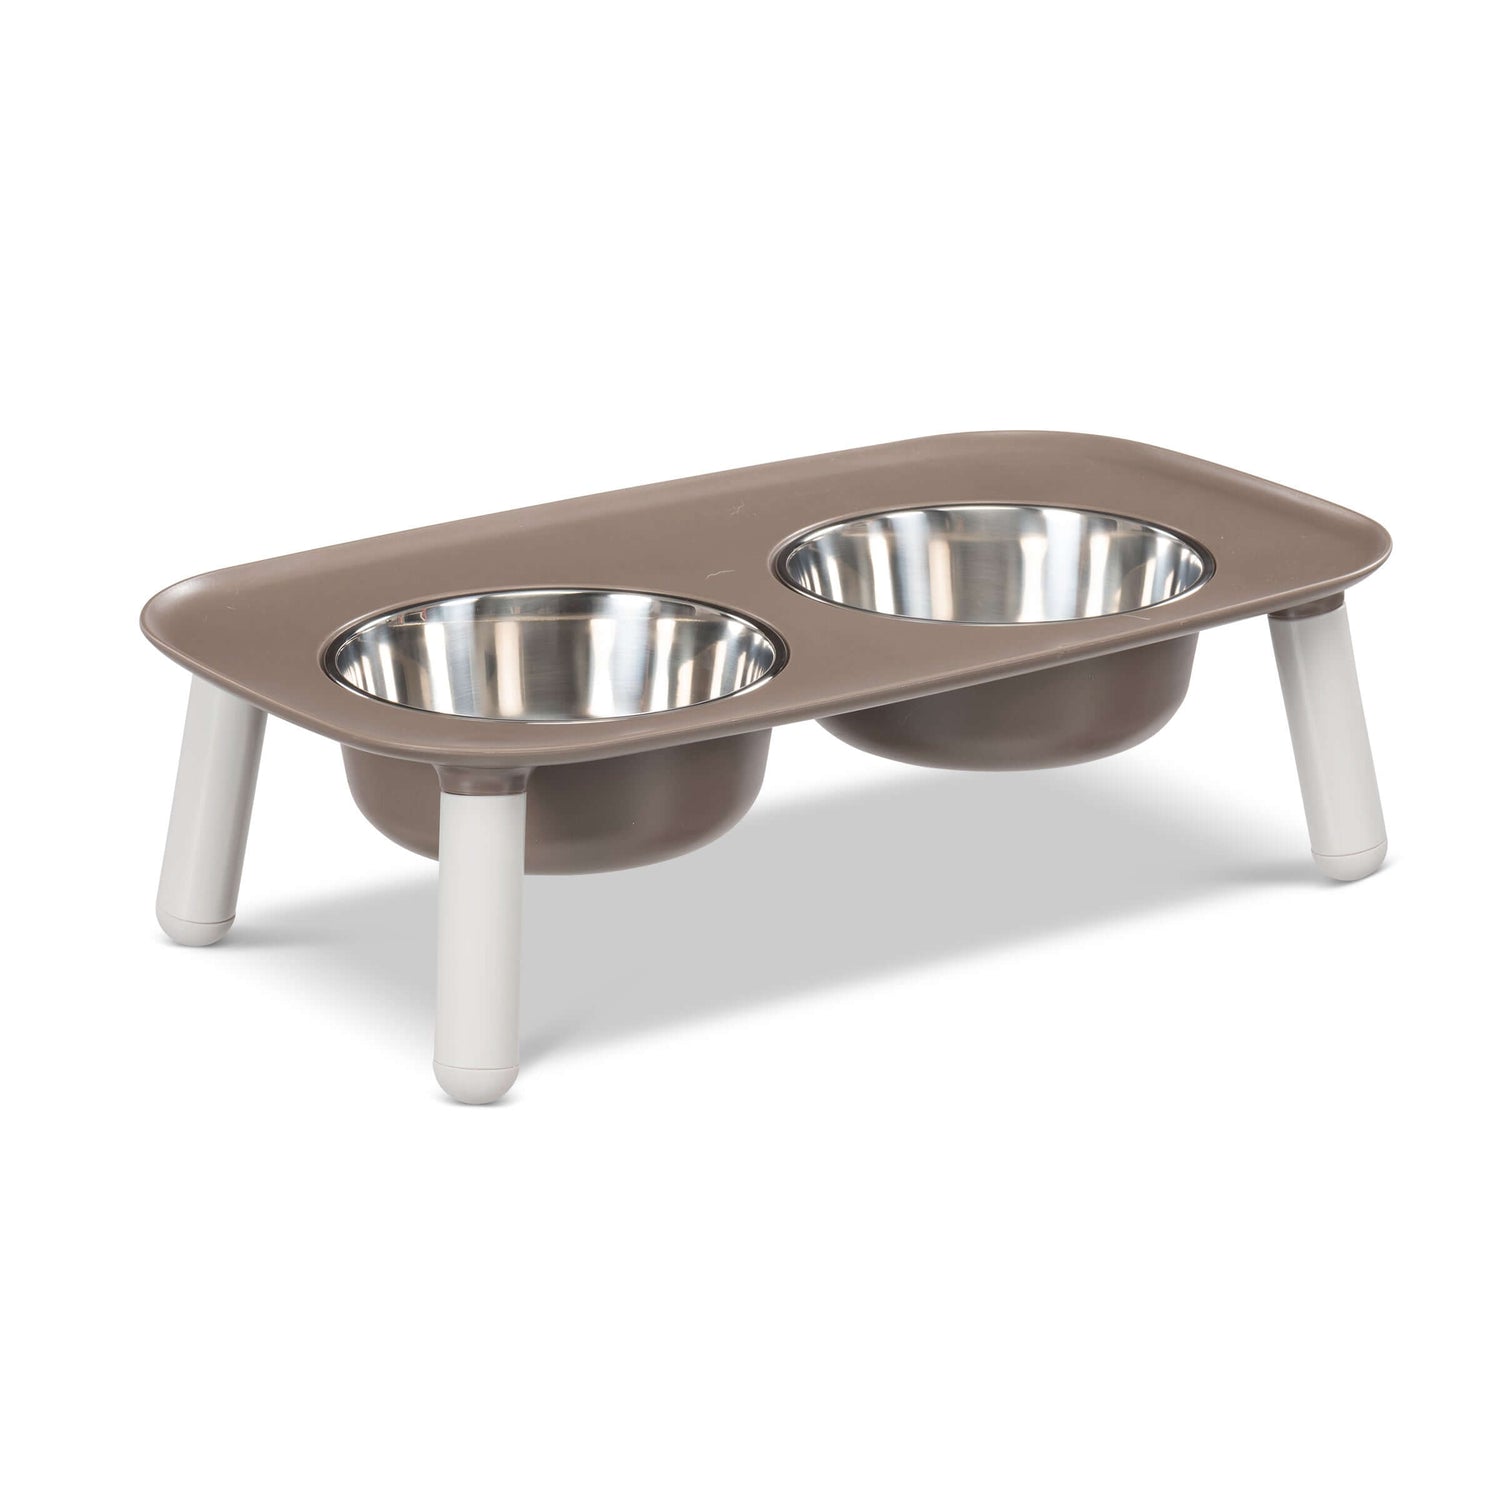 Adjustable height double dog bowl, 5 inch version